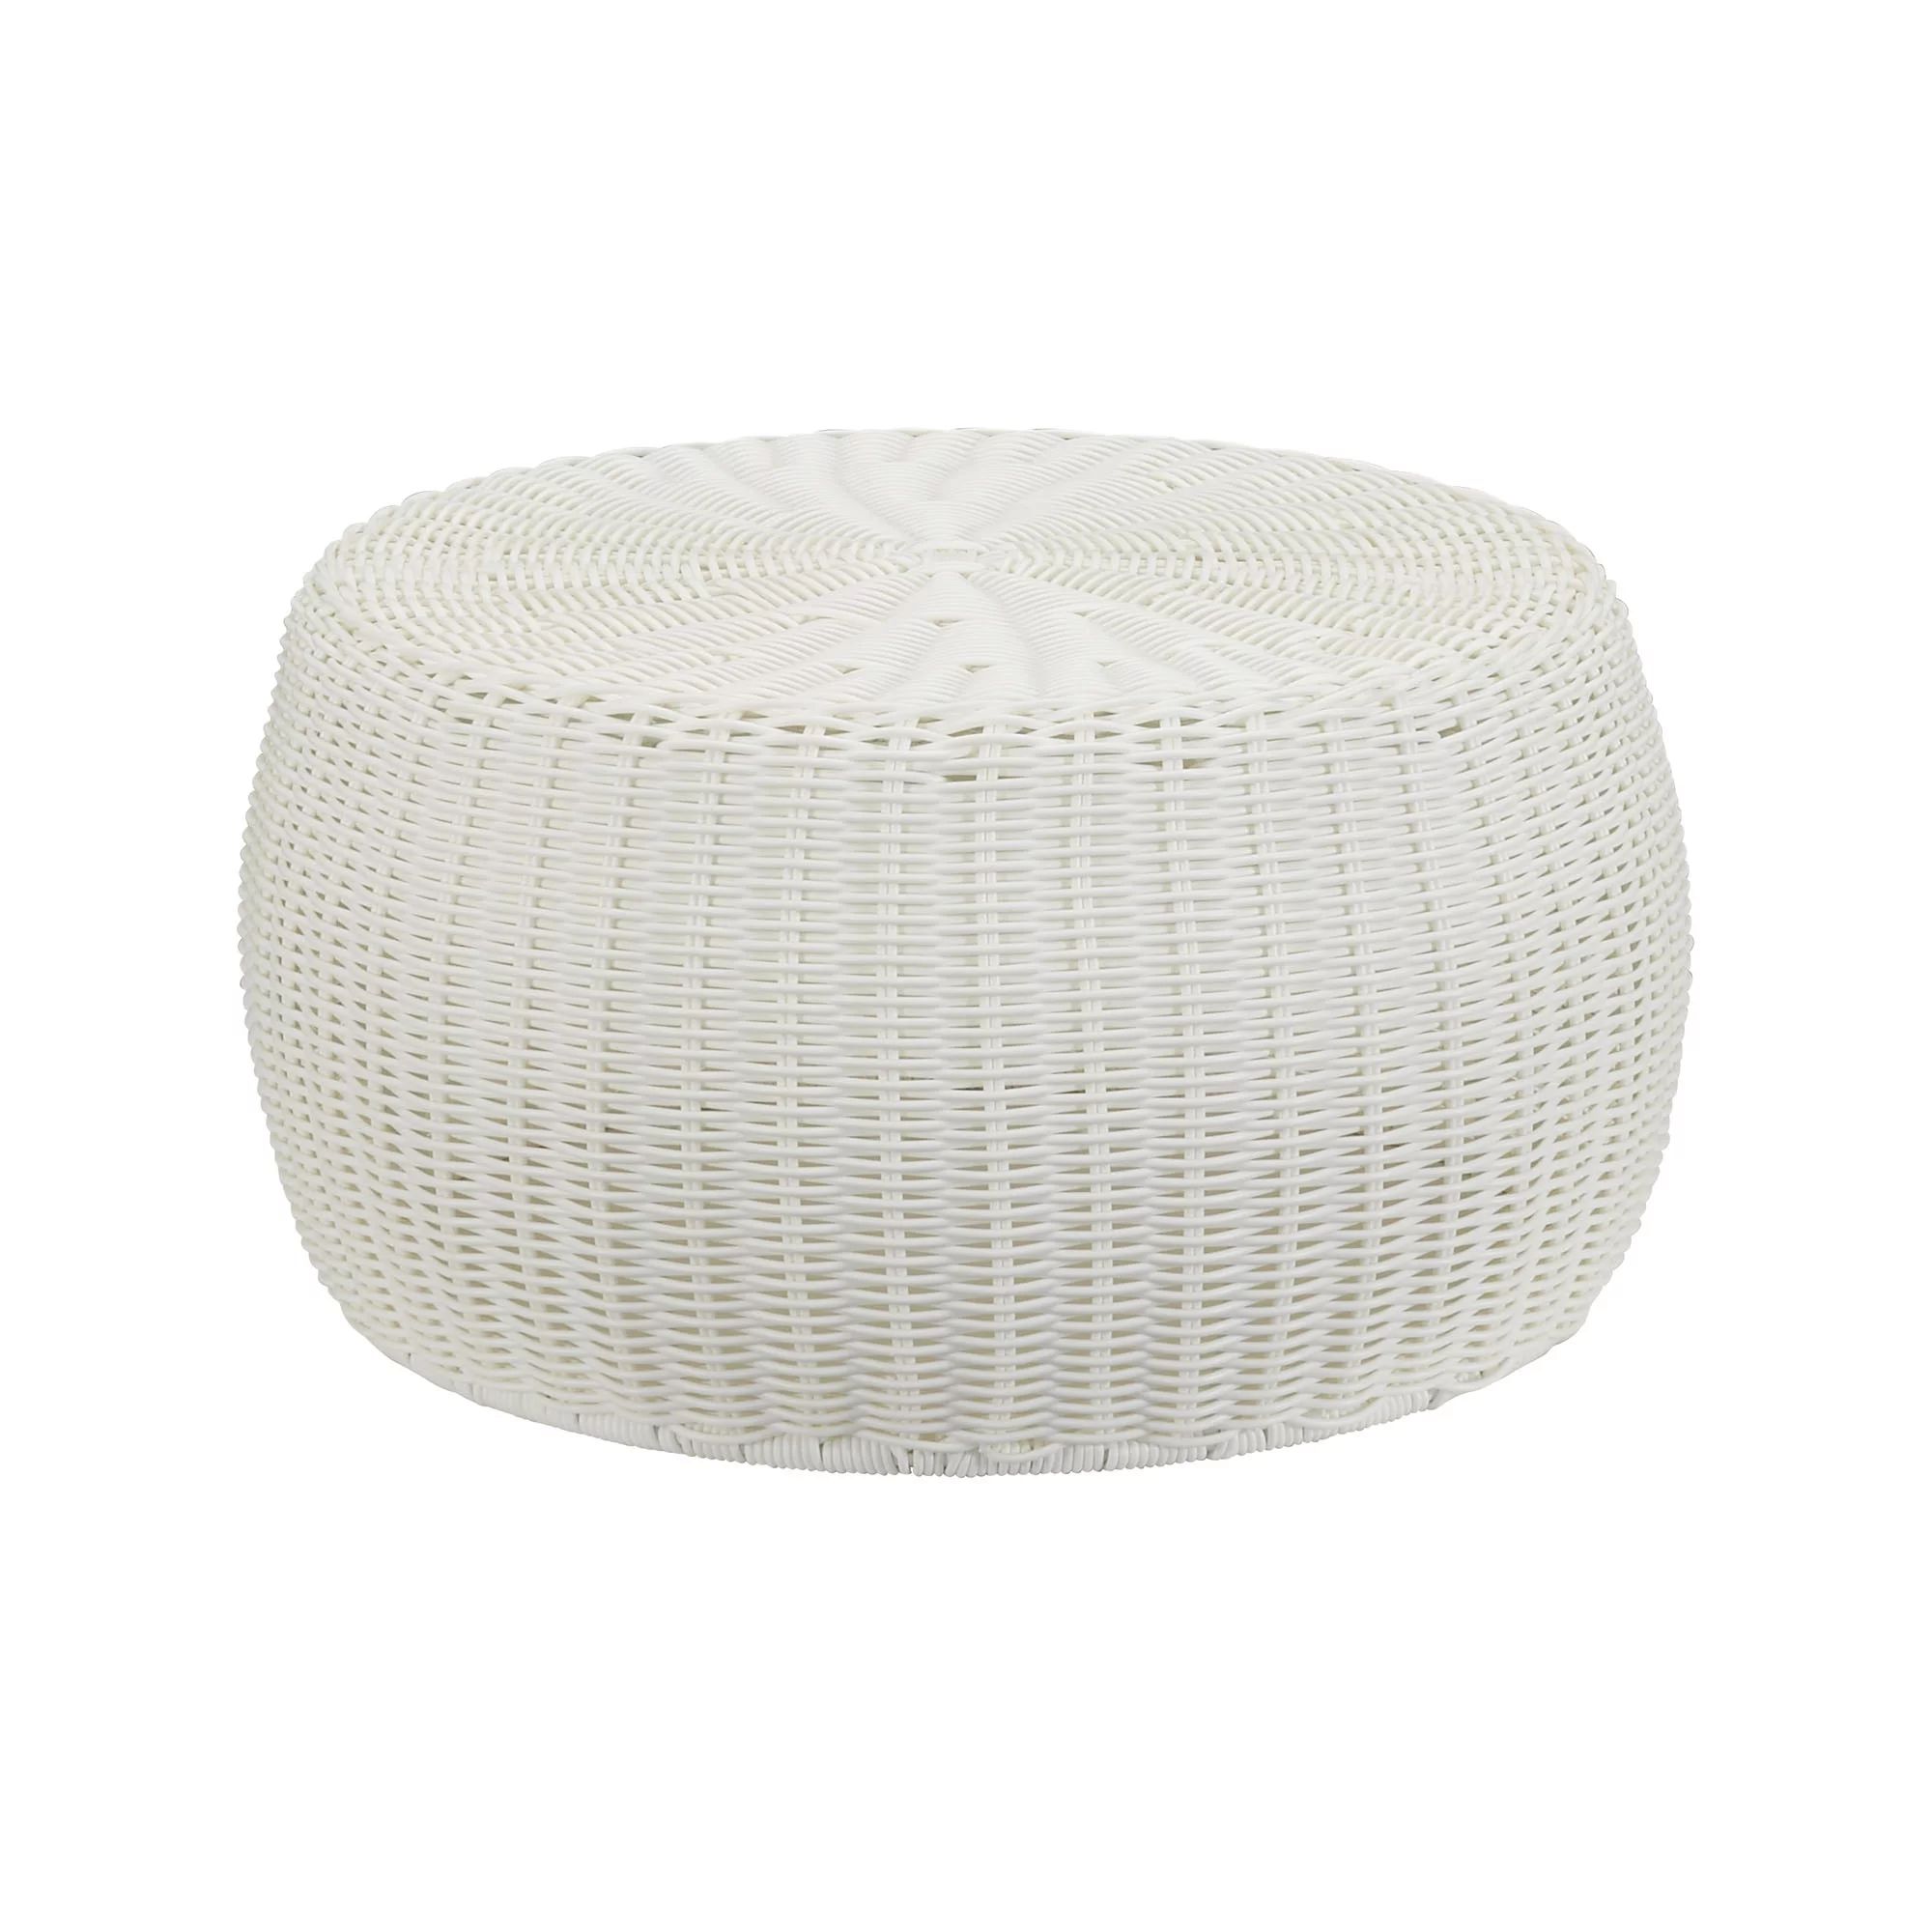 Household Essentials Round Resin Wicker Ottoman Table in White, 9" H x 16" D | Walmart (US)